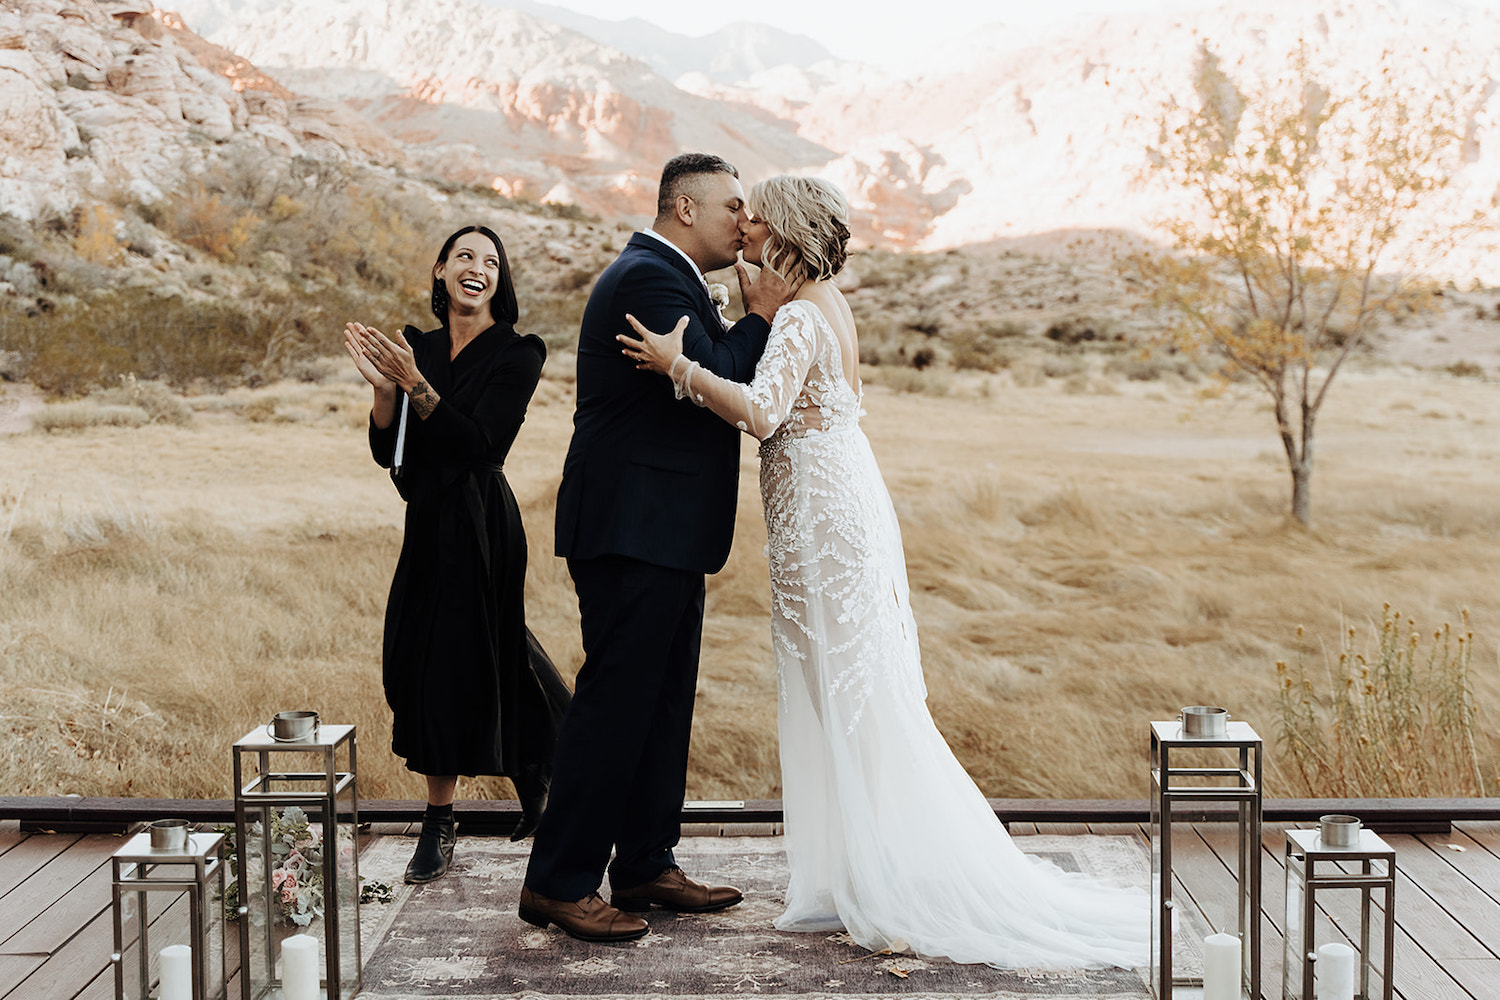 Couple sharing a kiss during their elopement ceremony in Las Vegas with their officiant clapping while walking away